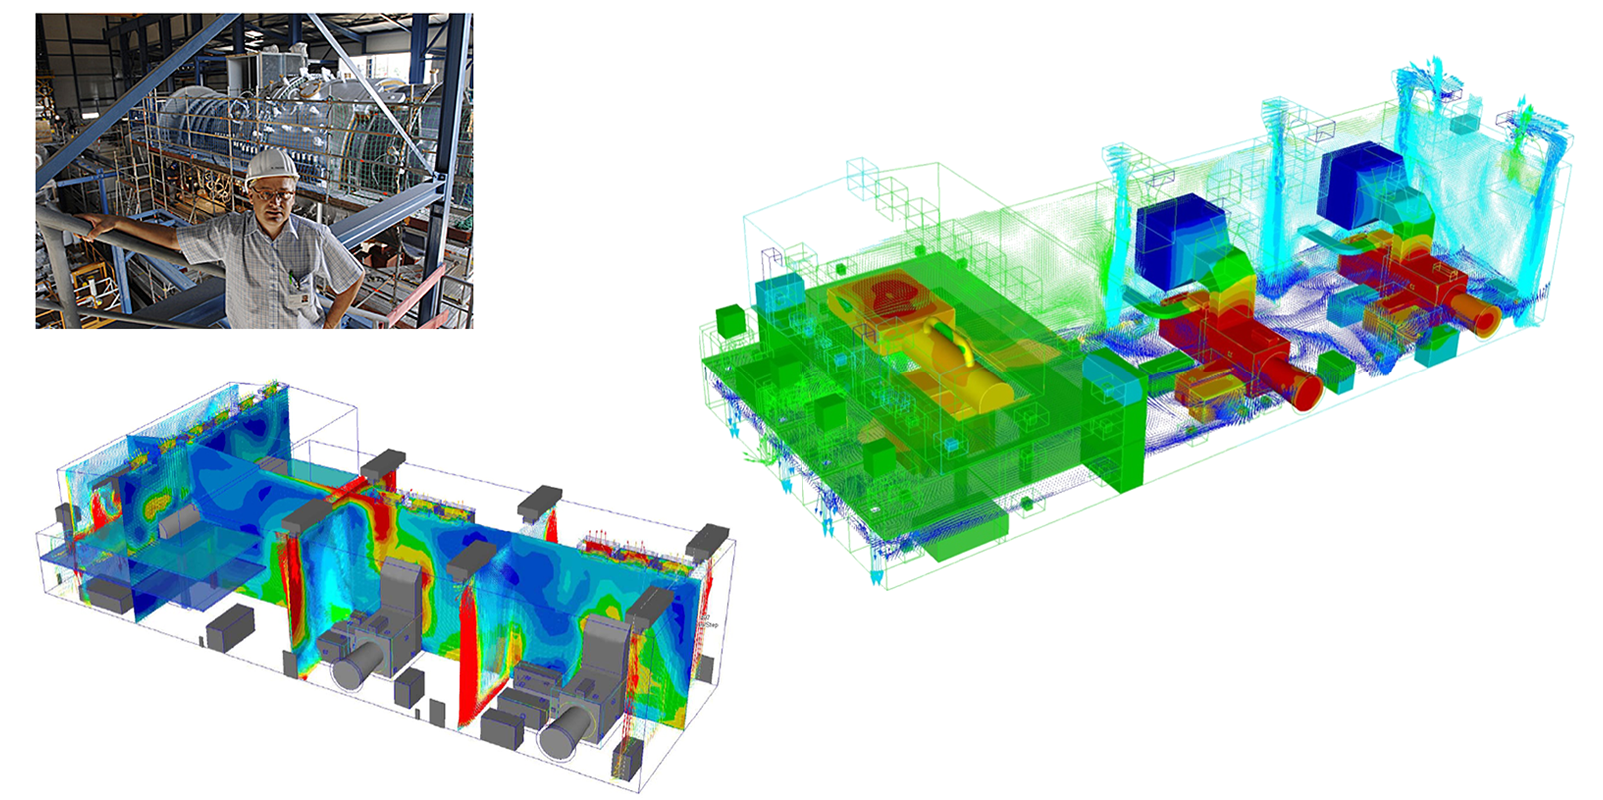 HVAC Analysis of Gas Turbine Power Plant - CFD Consulting Services - Predictive Engineering Portland Oregon